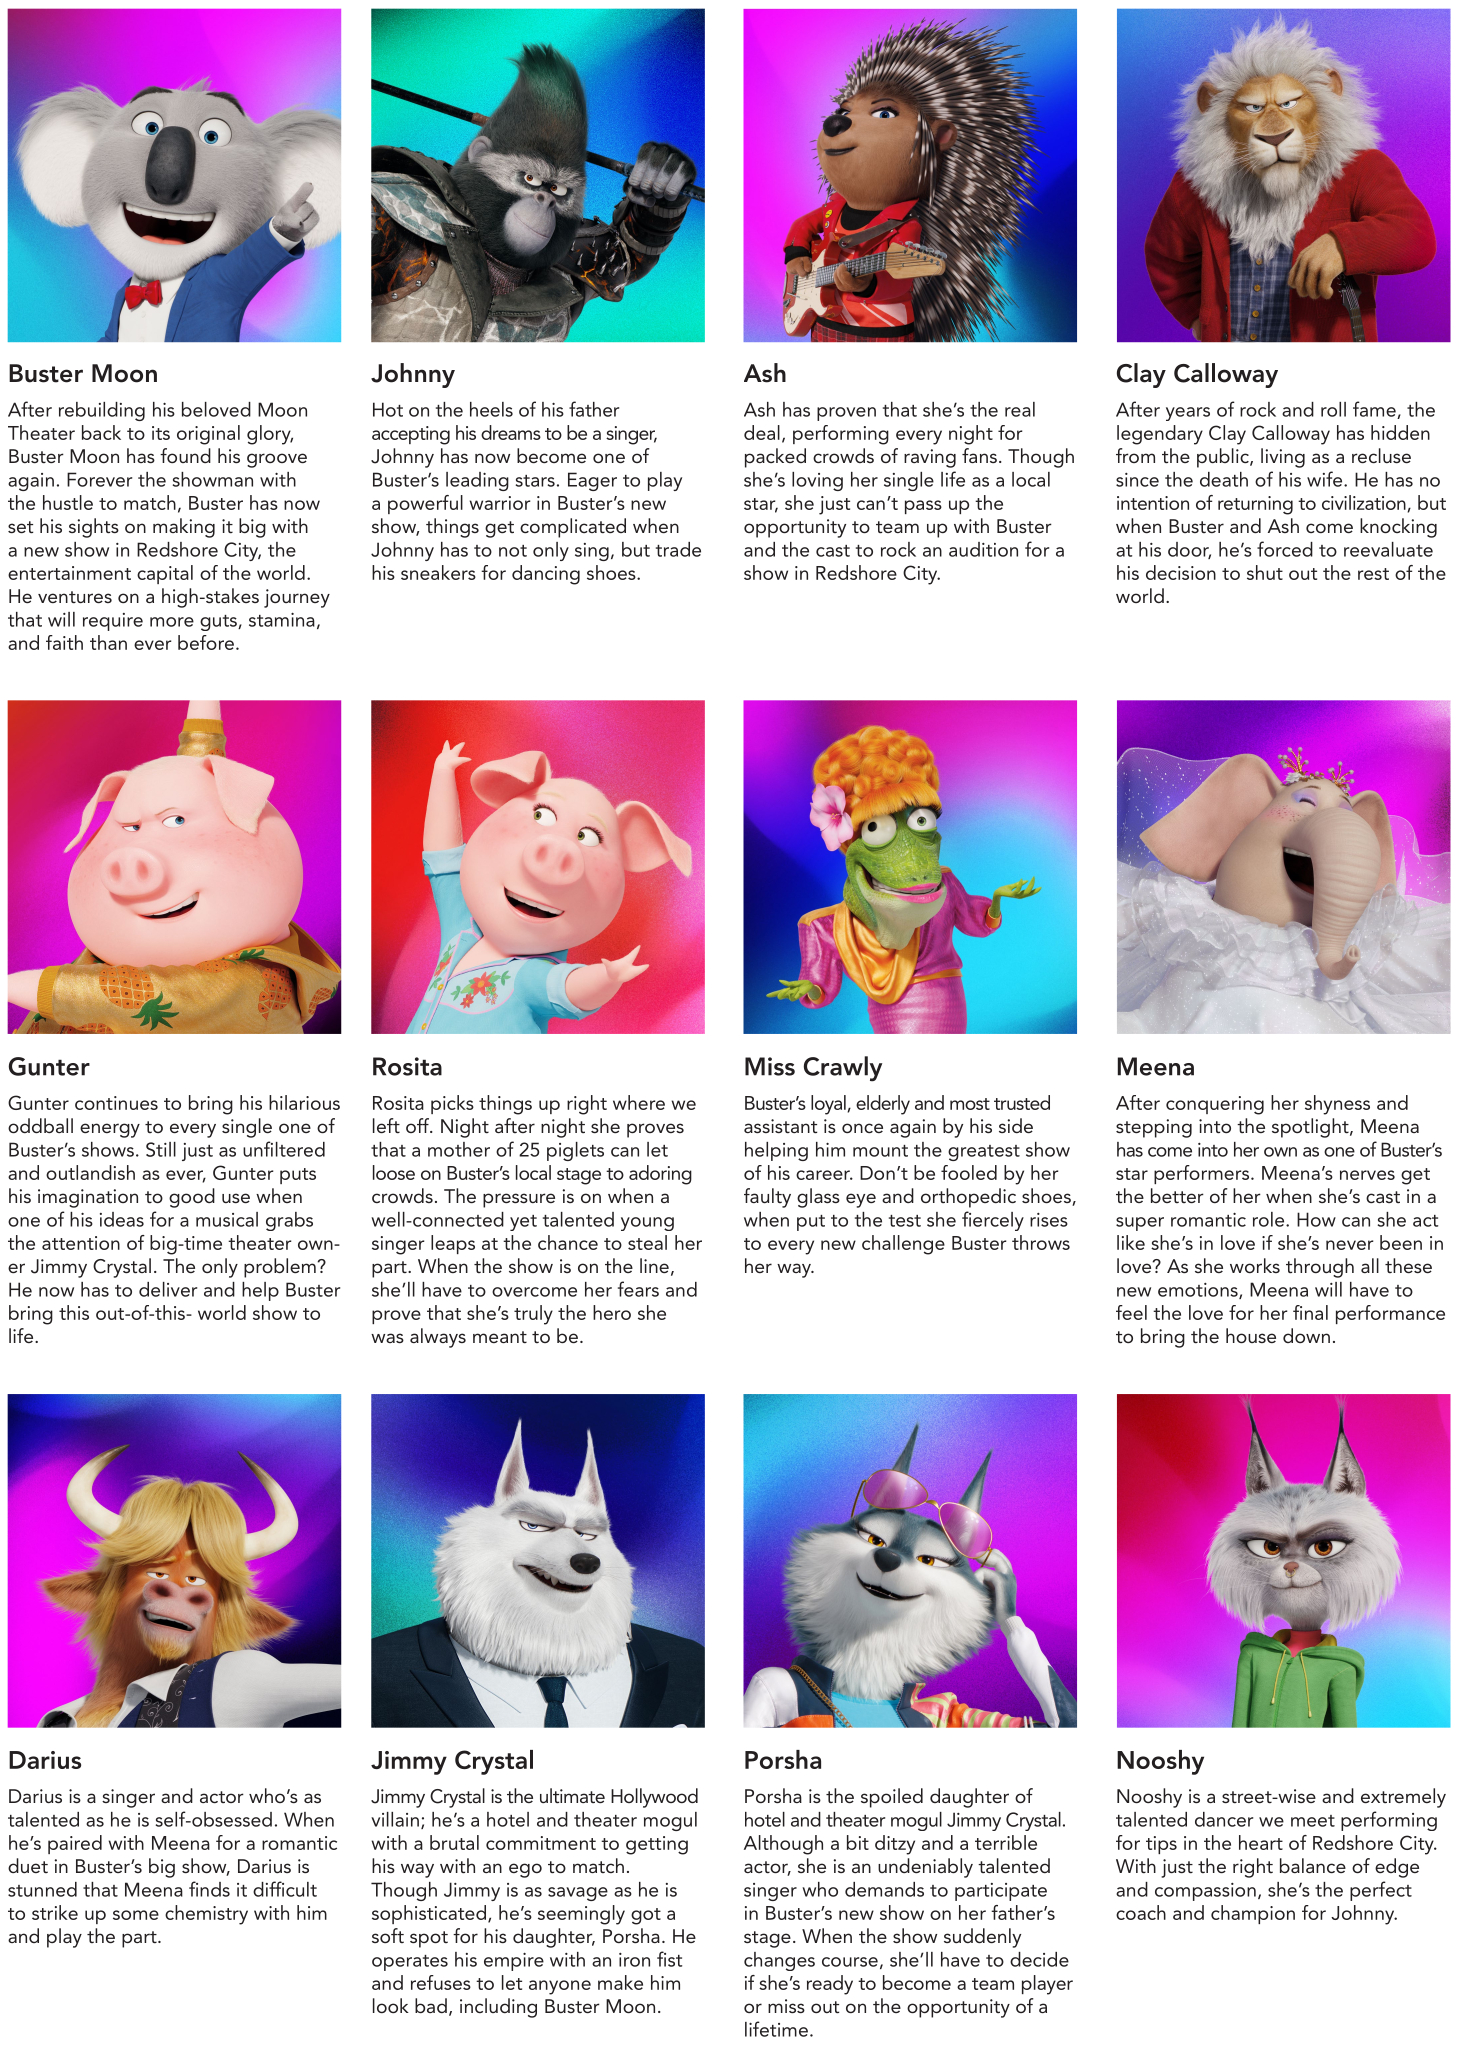 Images of the leading characters with character descriptions beneath each.